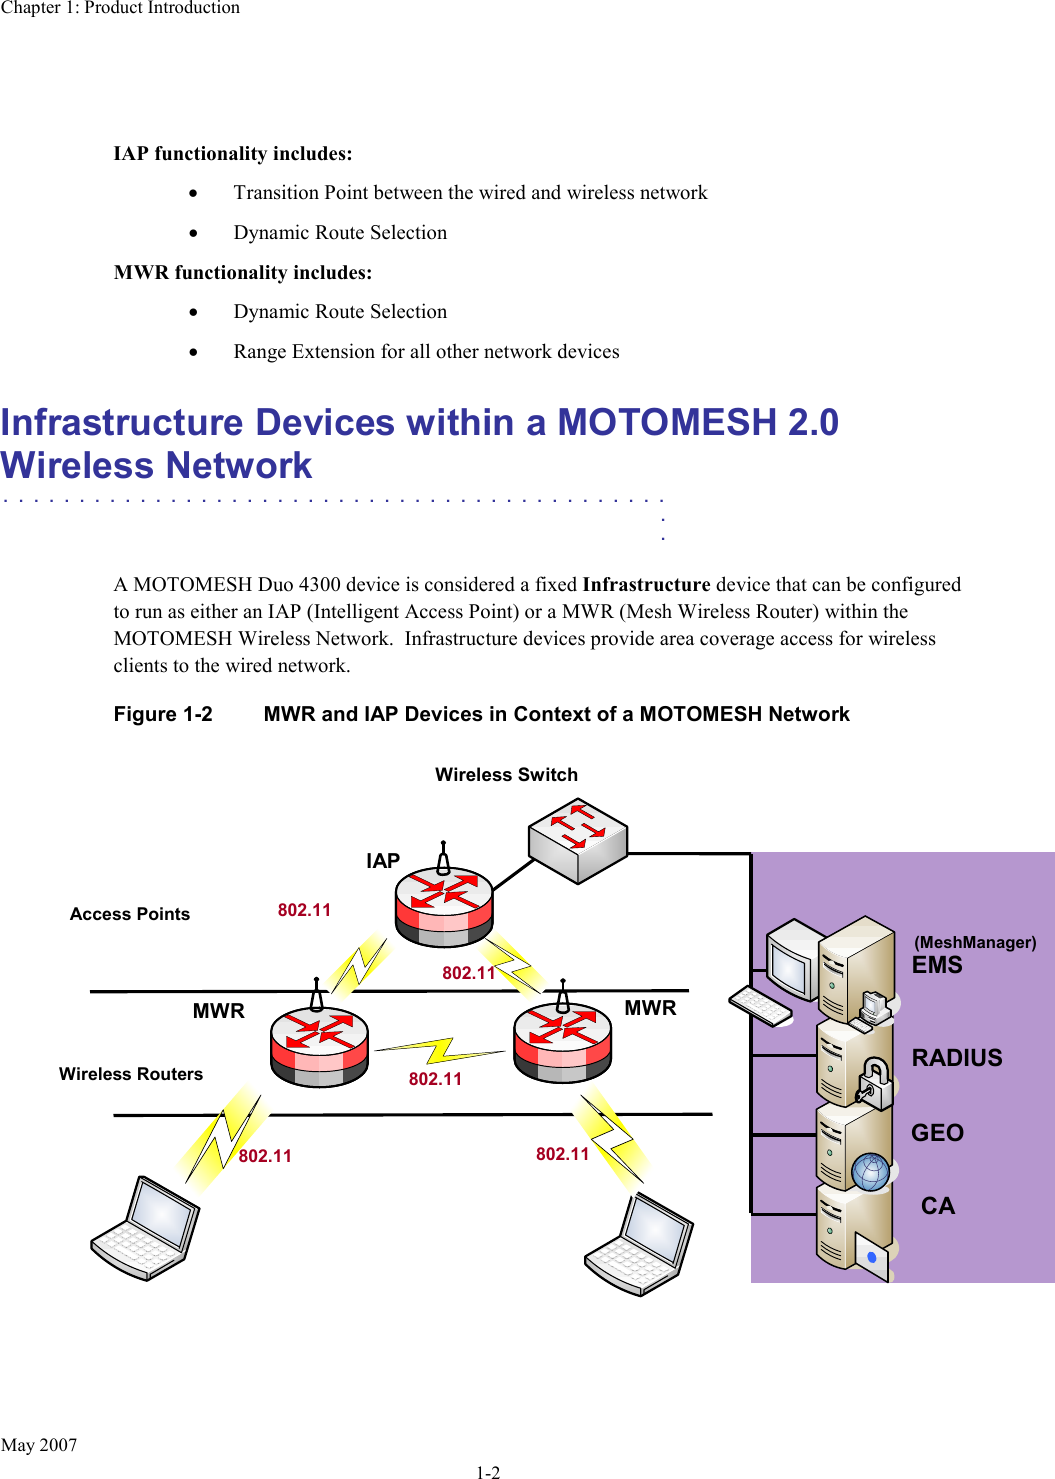 Chapter 1: Product Introduction May 2007 1-2   IAP functionality includes: • Transition Point between the wired and wireless network • Dynamic Route Selection MWR functionality includes: • Dynamic Route Selection • Range Extension for all other network devices Infrastructure Devices within a MOTOMESH 2.0 Wireless Network ............................................   .    .  A MOTOMESH Duo 4300 device is considered a fixed Infrastructure device that can be configured to run as either an IAP (Intelligent Access Point) or a MWR (Mesh Wireless Router) within the MOTOMESH Wireless Network.  Infrastructure devices provide area coverage access for wireless clients to the wired network.  Figure 1-2  MWR and IAP Devices in Context of a MOTOMESH Network  Wireless Network  802.11 802.11 802.11 802.11 EMS CA GEO RADIUS IAP MWR  MWR 802.11 Access Points Wireless Routers (MeshManager) Wireless Switch 